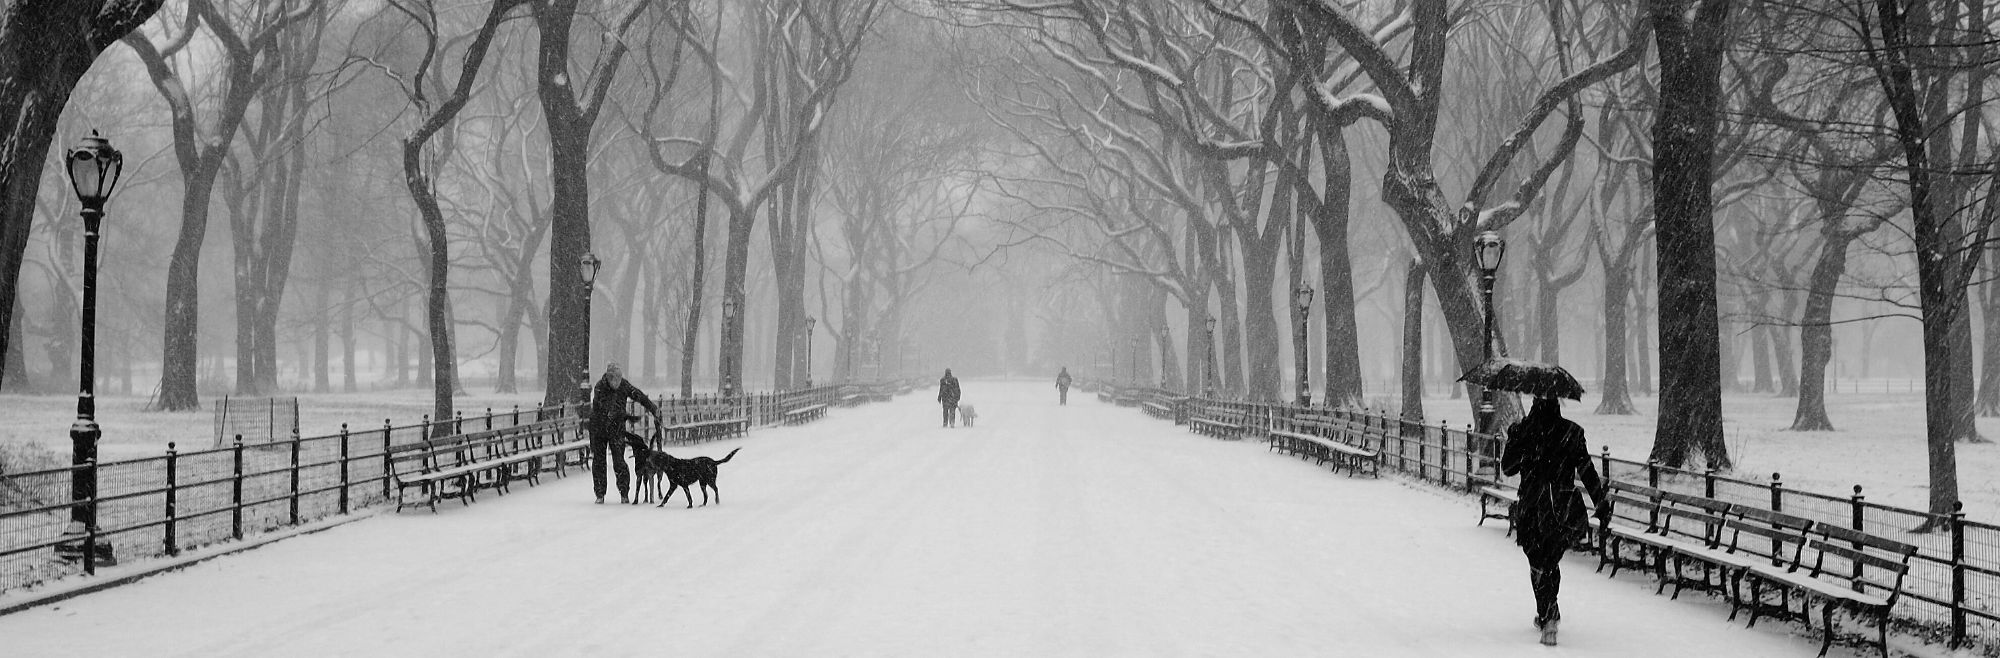 The Central Park Mall in the snow 2000 BW 2 web